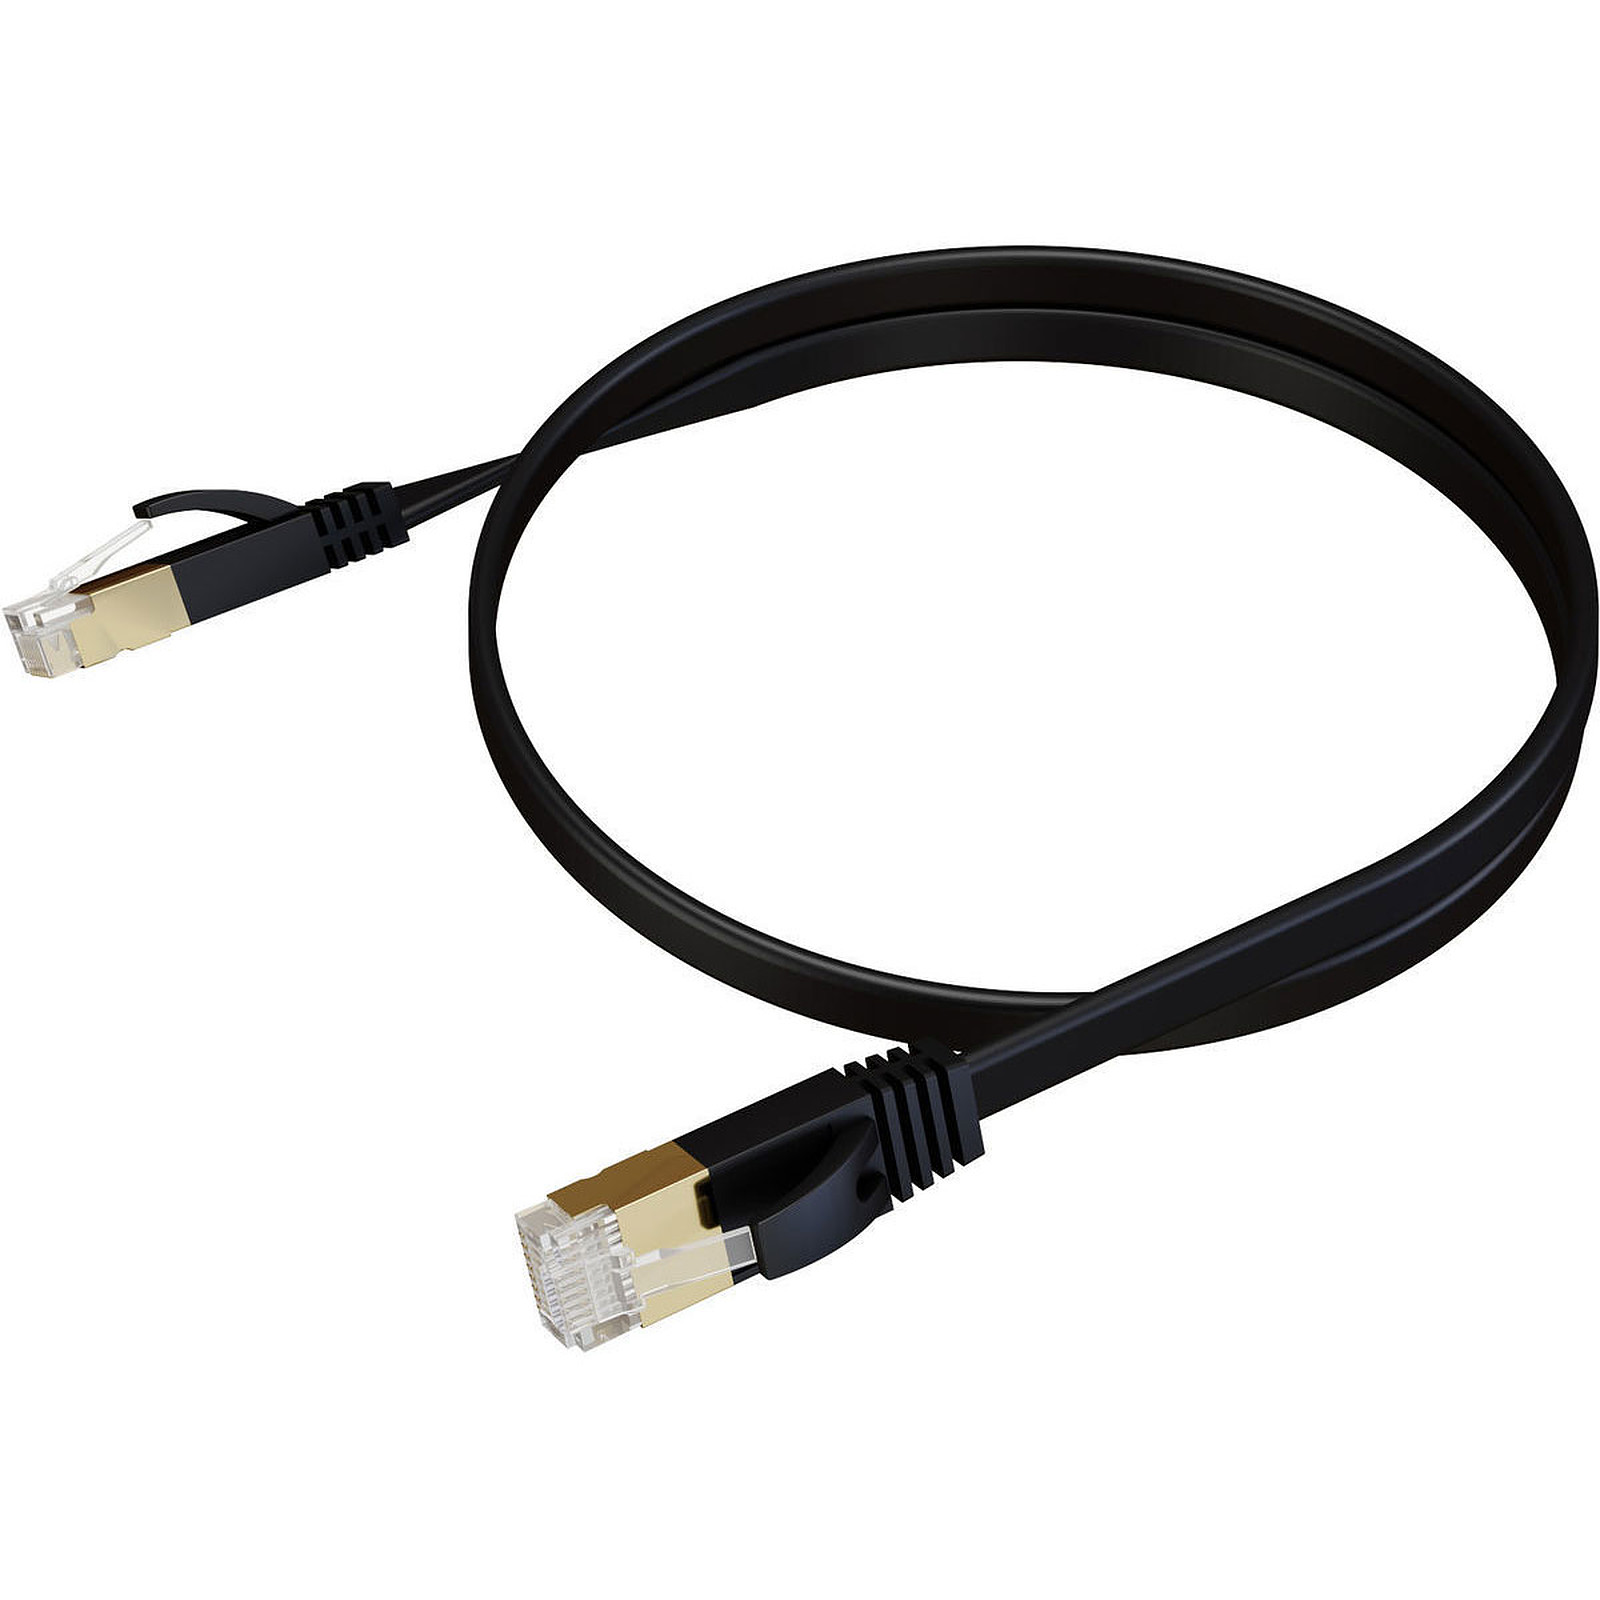 Real Cable E-NET 600-2 (3 m) - Cable RJ45 Real Cable